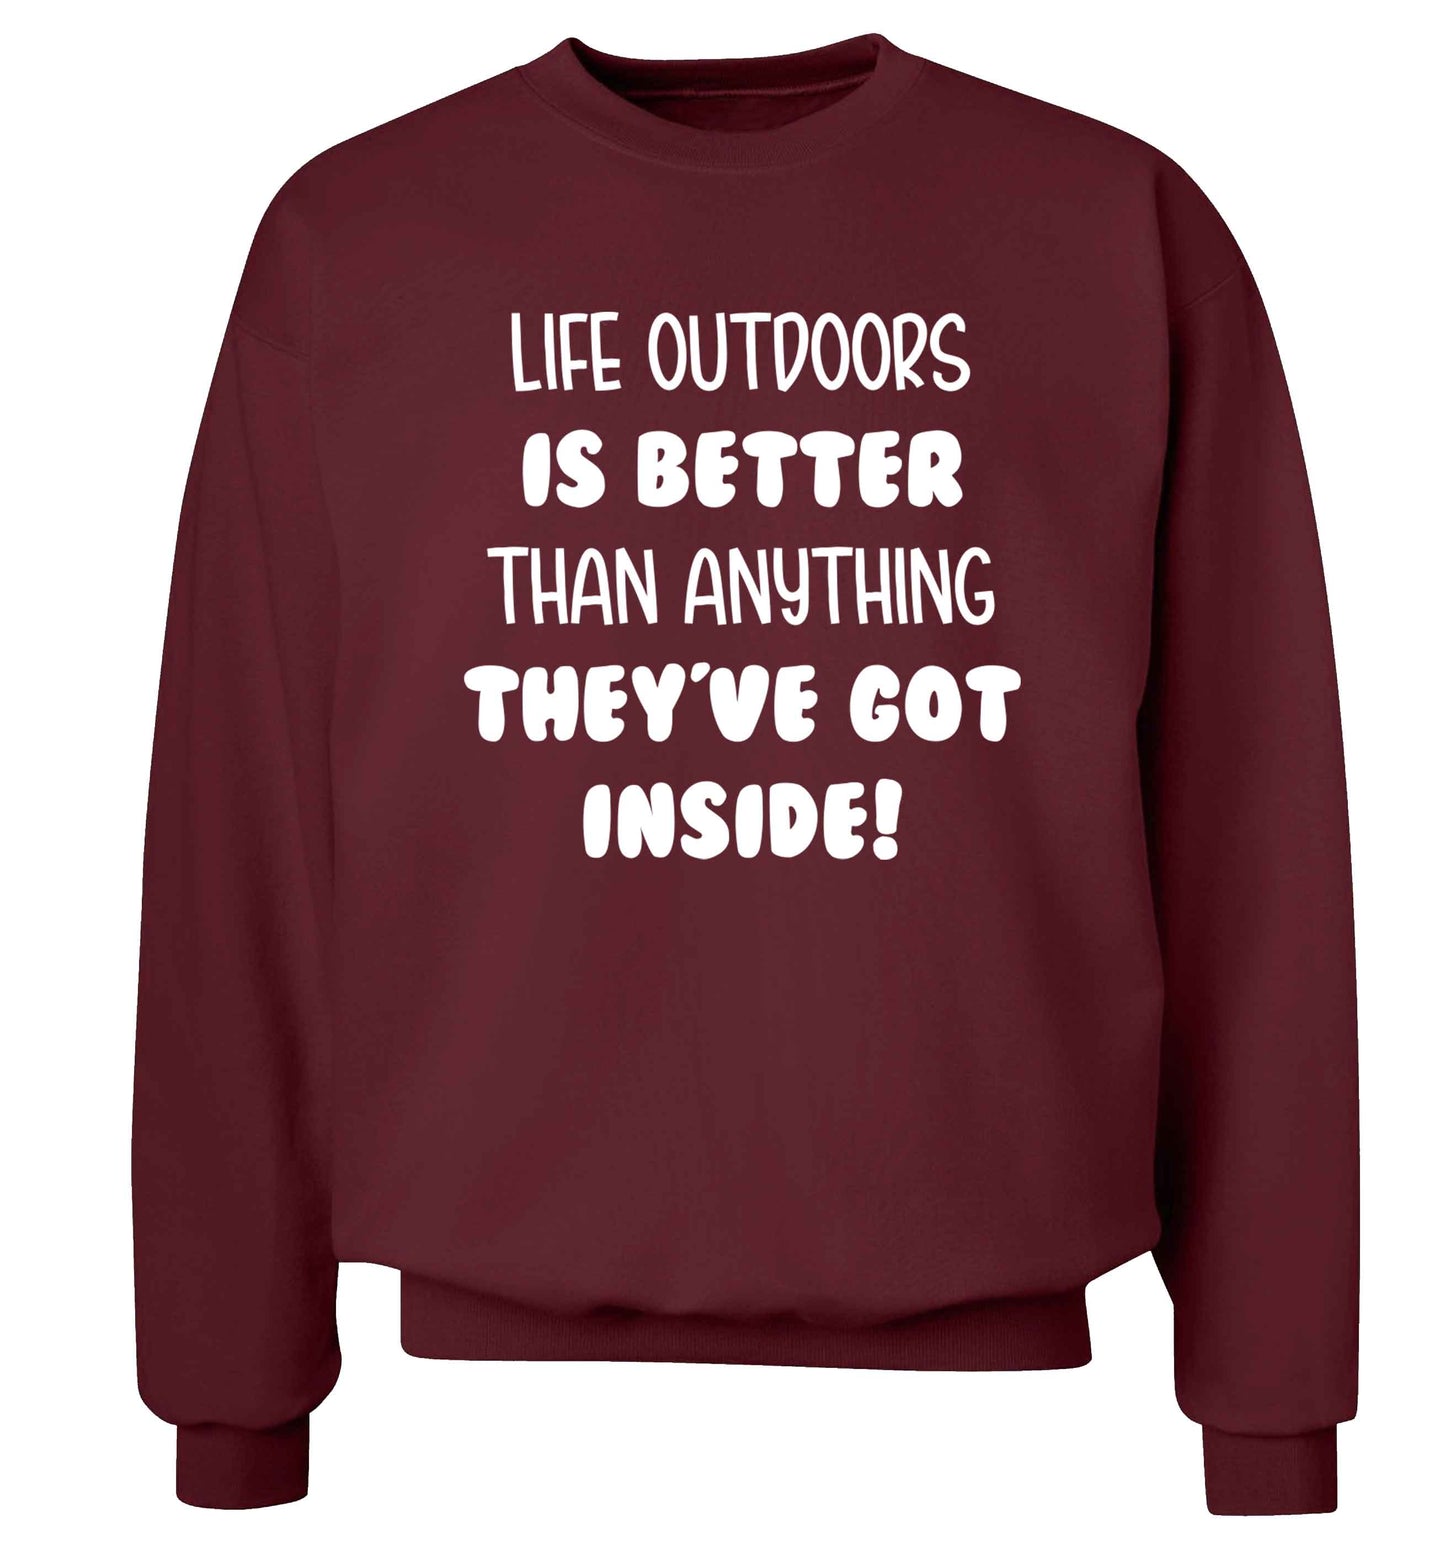 Life outdoors is better than anything they've go inside Adult's unisex maroon Sweater 2XL